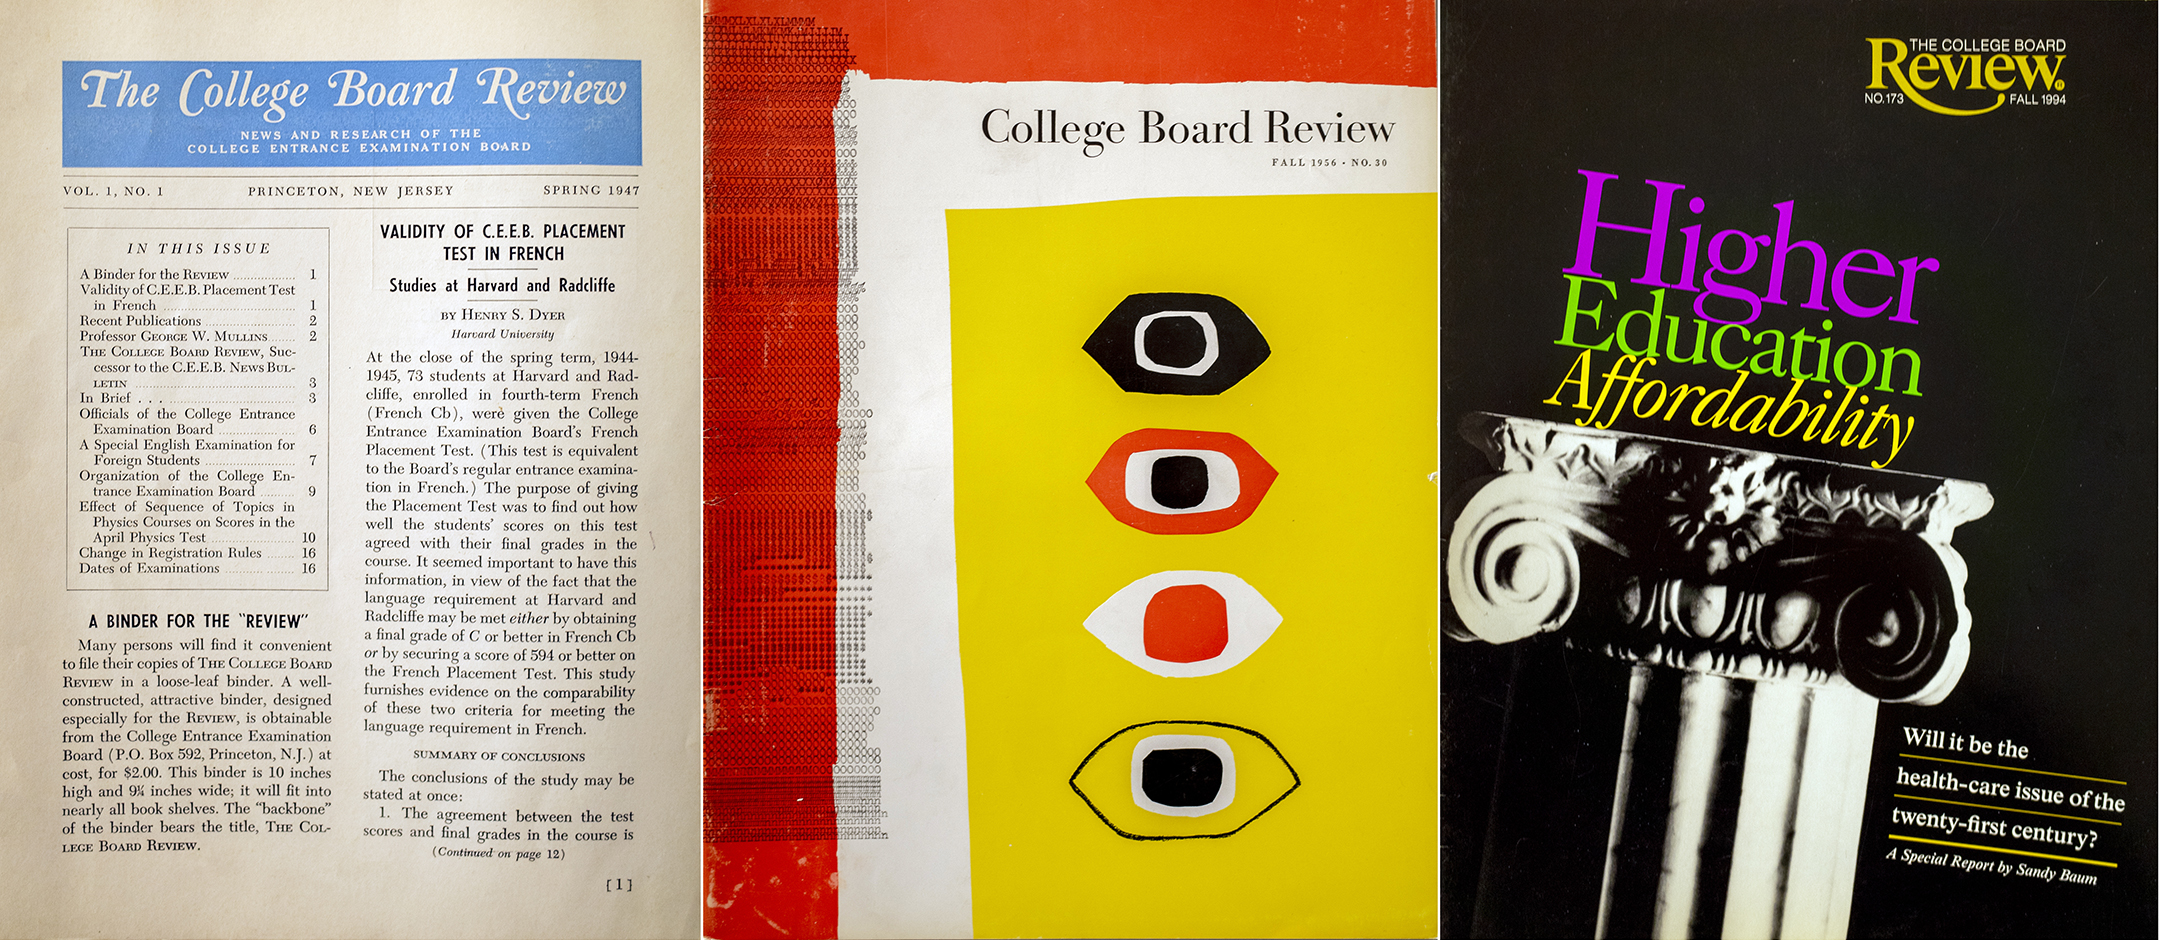 a series of three covers of the college board review magazine. the first, at left, is black text on white paper. the second, in the center, is an abstract piece of art in orange, white, black and red featuring four eye shaped objects in the center. the third, at right, is black with the image of the top of a classical column with the words higher education affordability in purple, green, and yellow letters